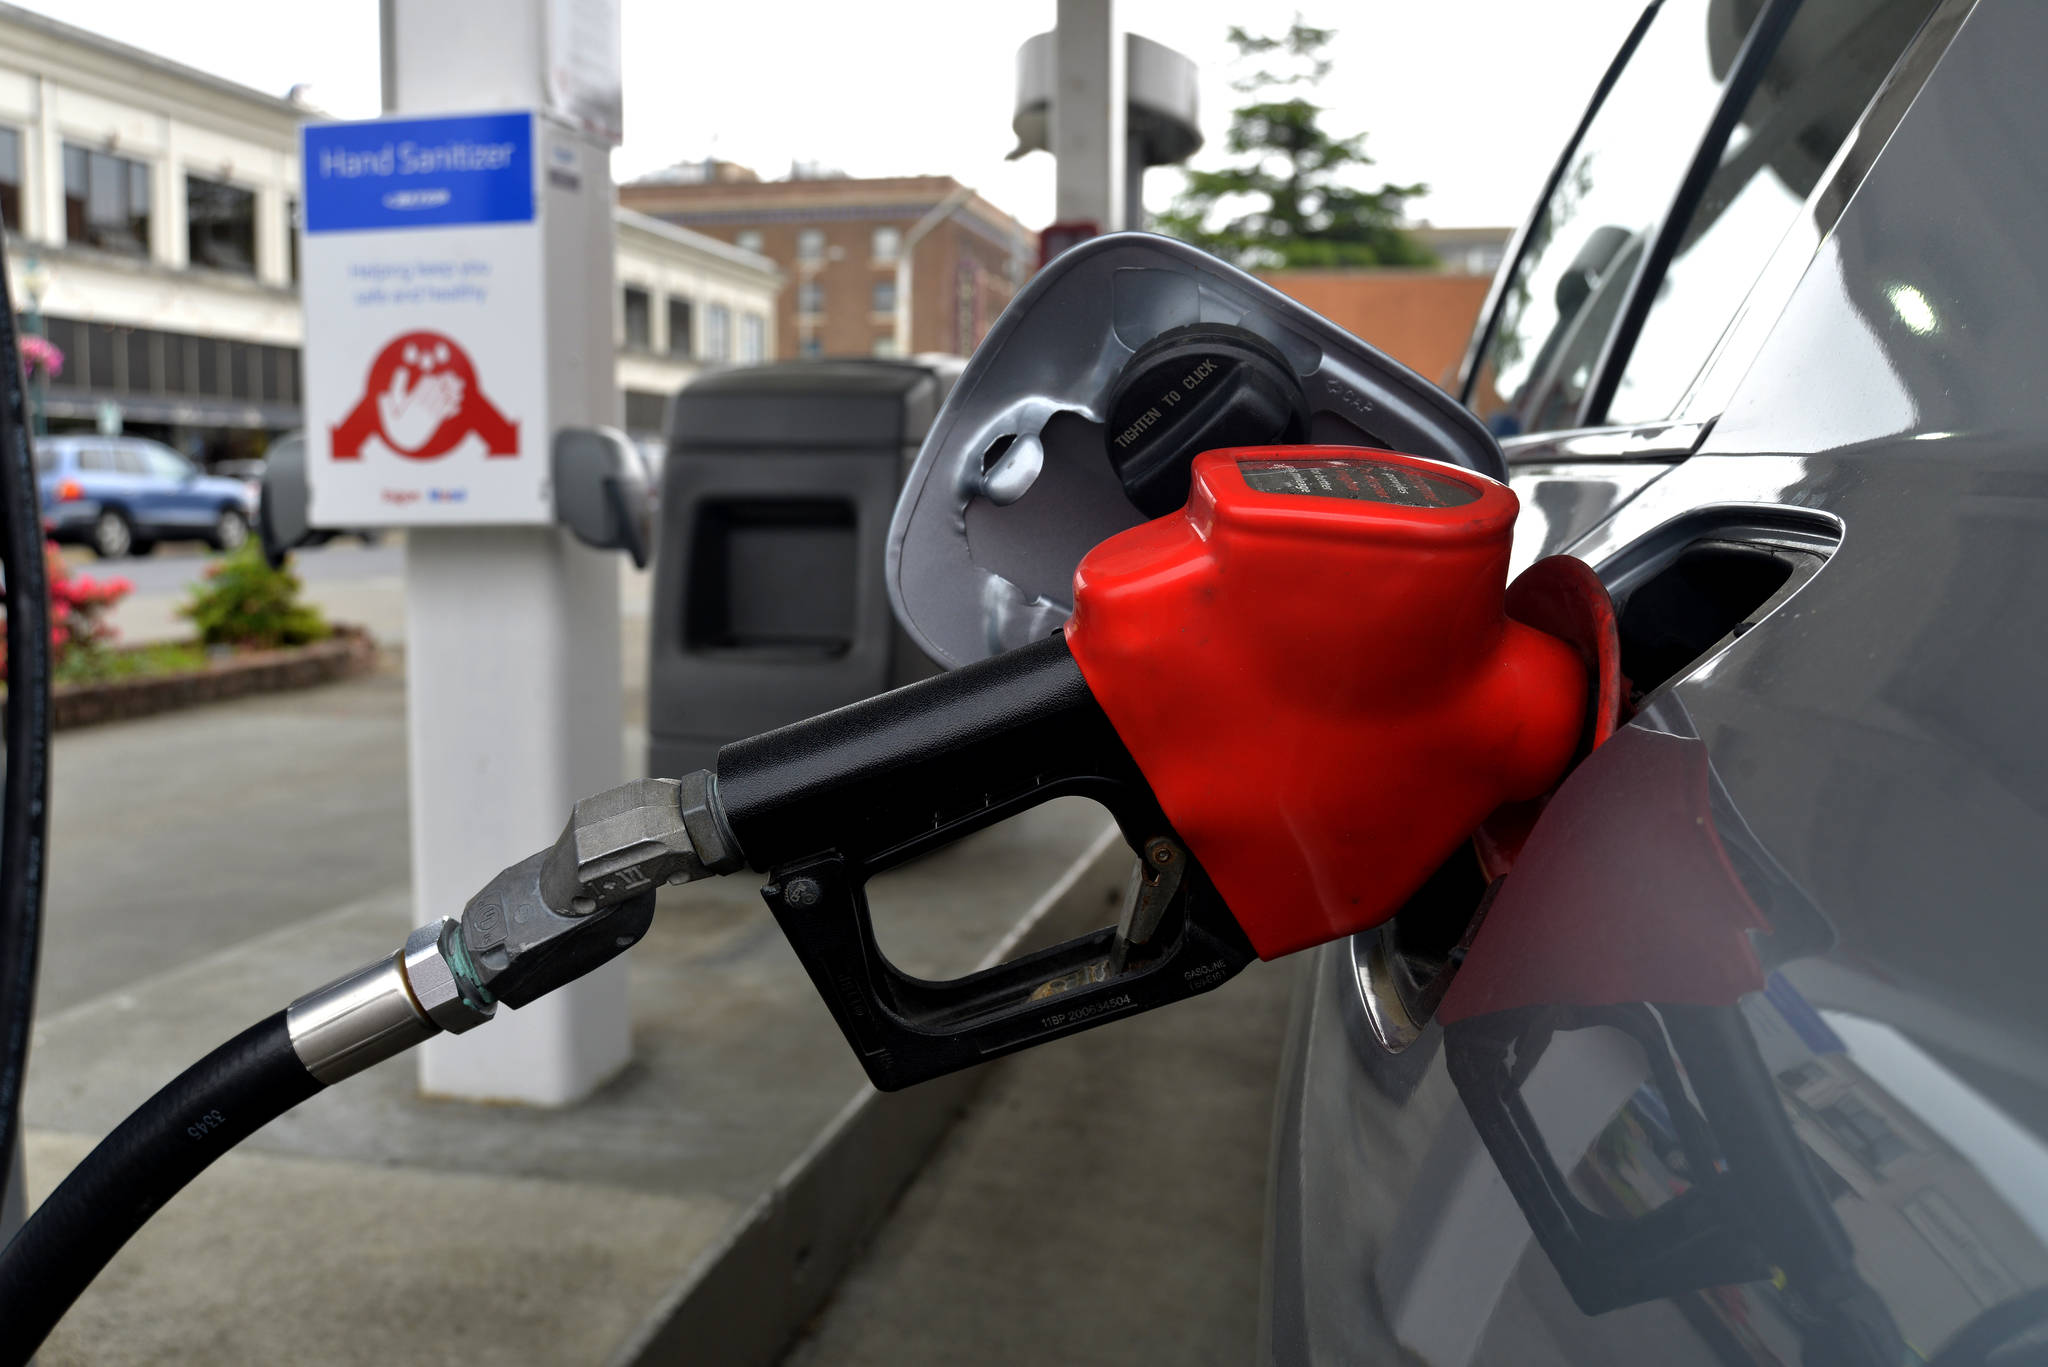 DAVE HAVILAND | THE DAILY WORLD 
Gasoline is being pumped into a vehicle at the Mobil station in Hoquiam on Wednesday. The average price of gas eased 1 cent per gallon this week in Washington.